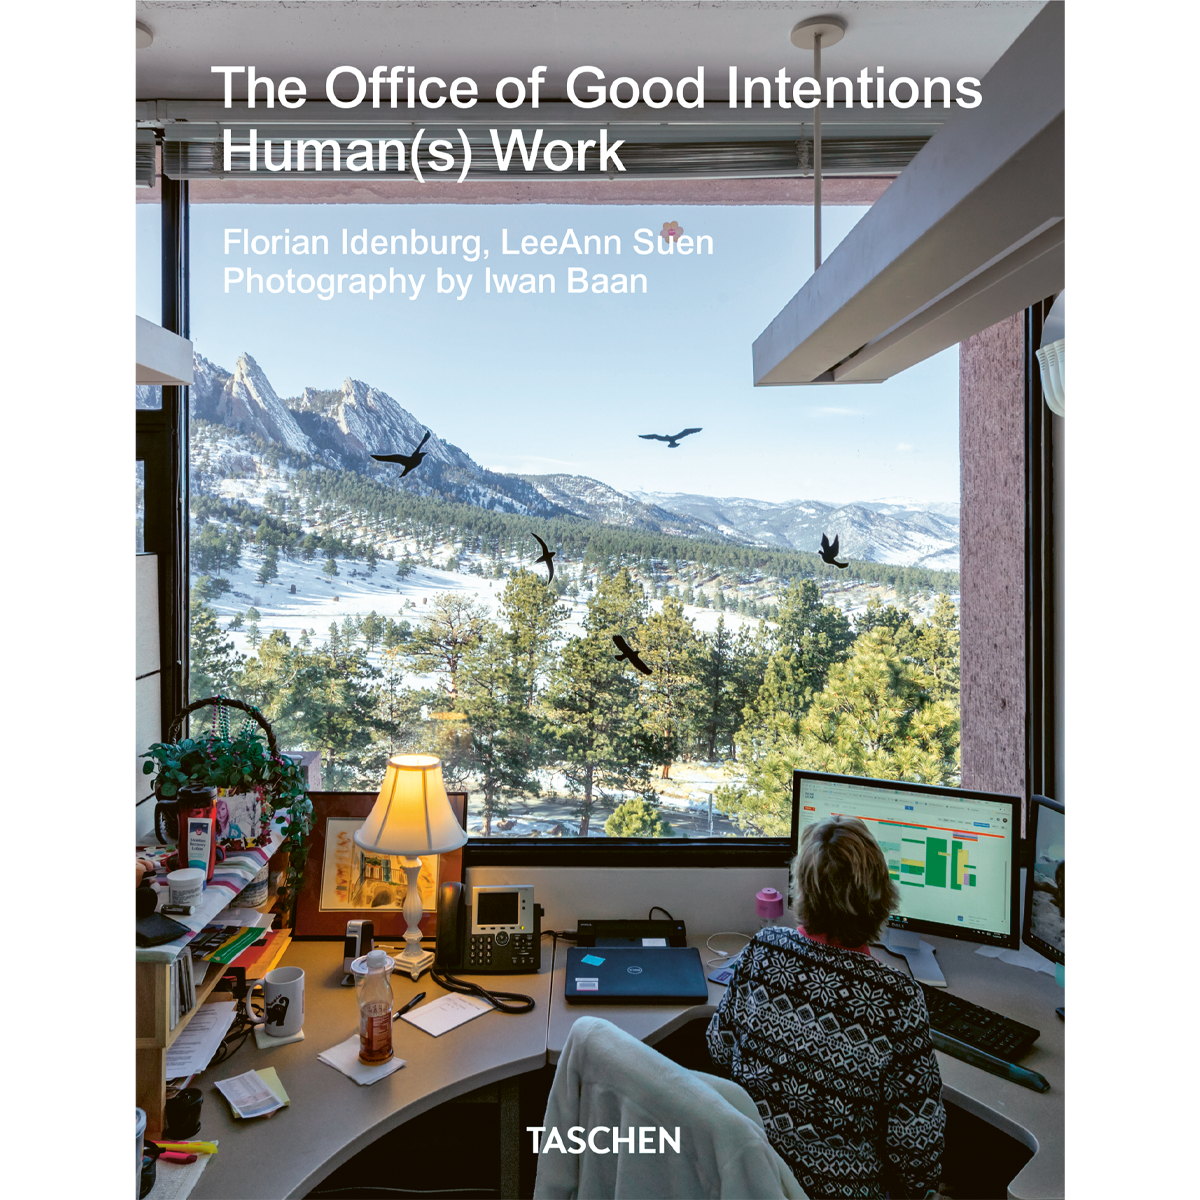 The Office of Good Intentions